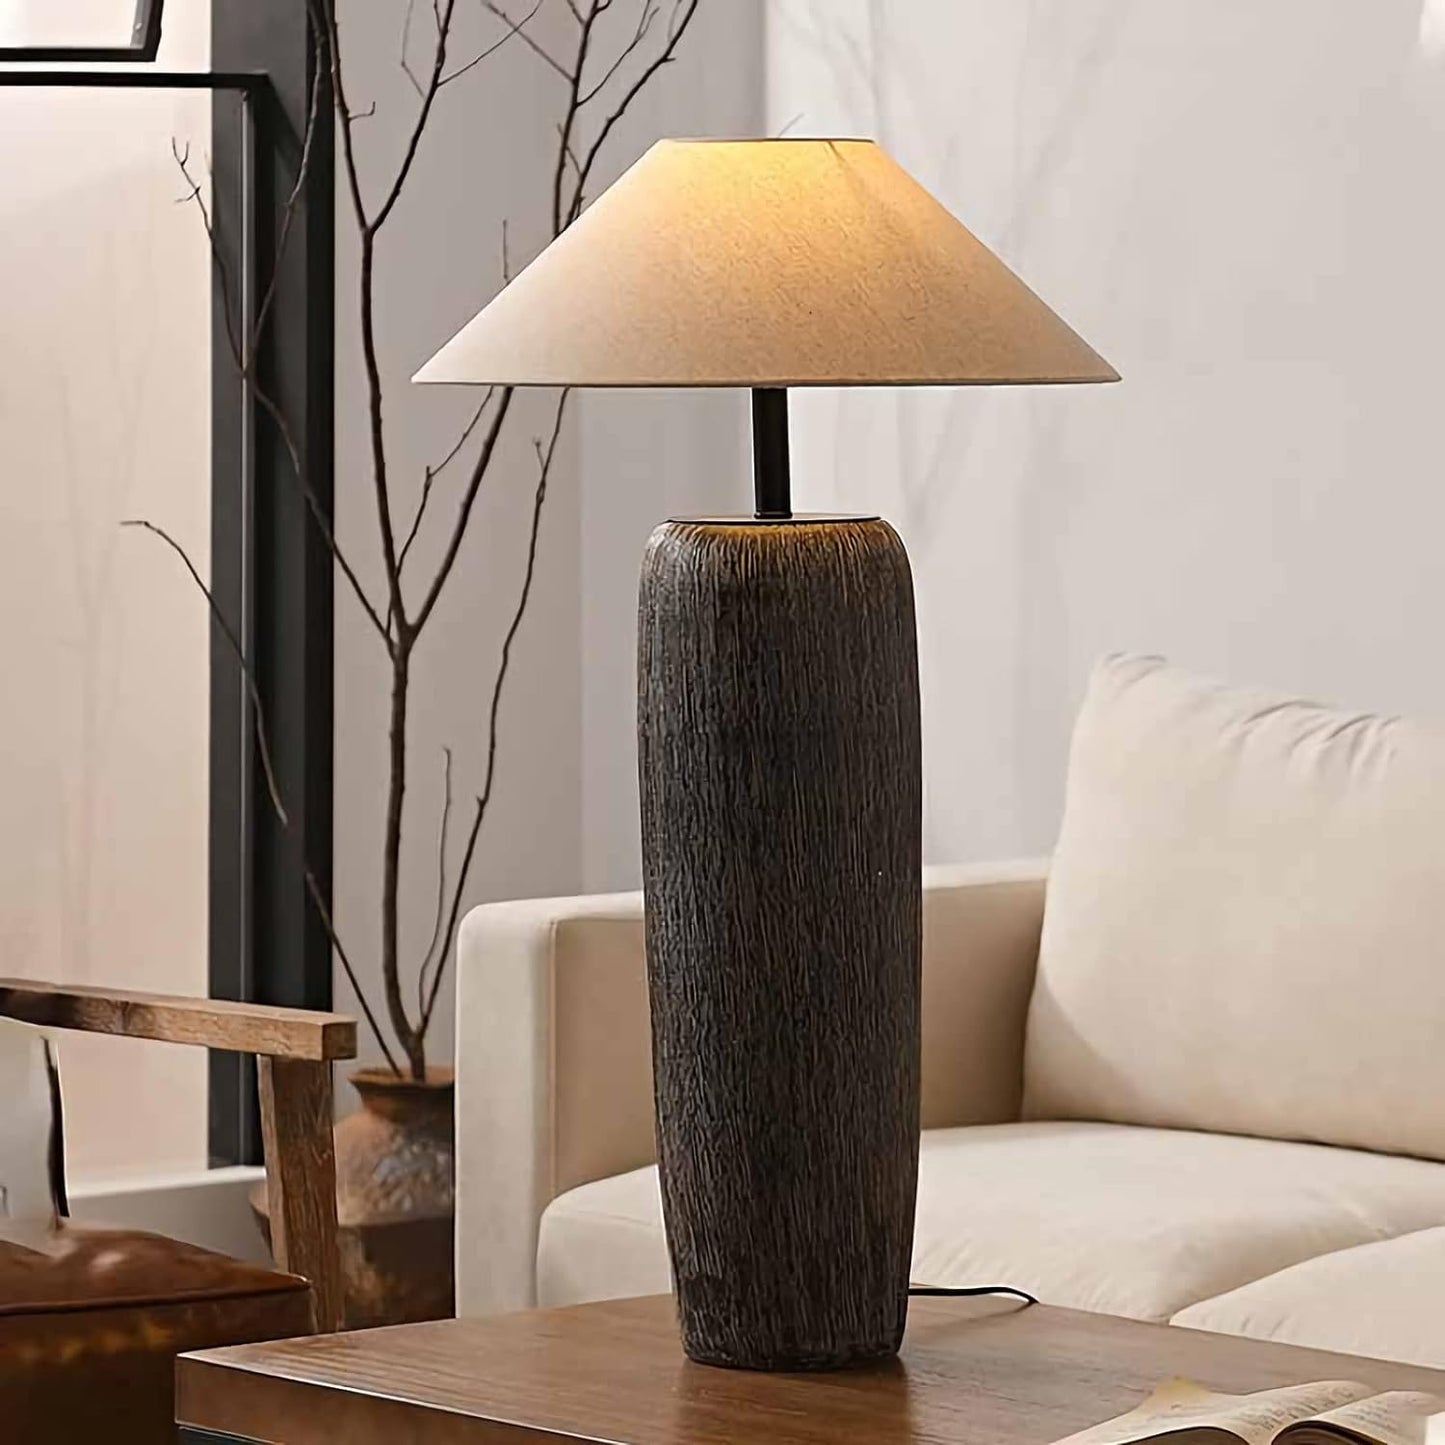 HATUO Vintage Black Ceramic Table Lamp, Rustic Farmhouse Handmade Old Wood Grain Table Lamp, American Imitation Branch Lamp Body with Fabric Shade Bedside Lamp for Living Room Bedroom (D23.6*H43.3IN)